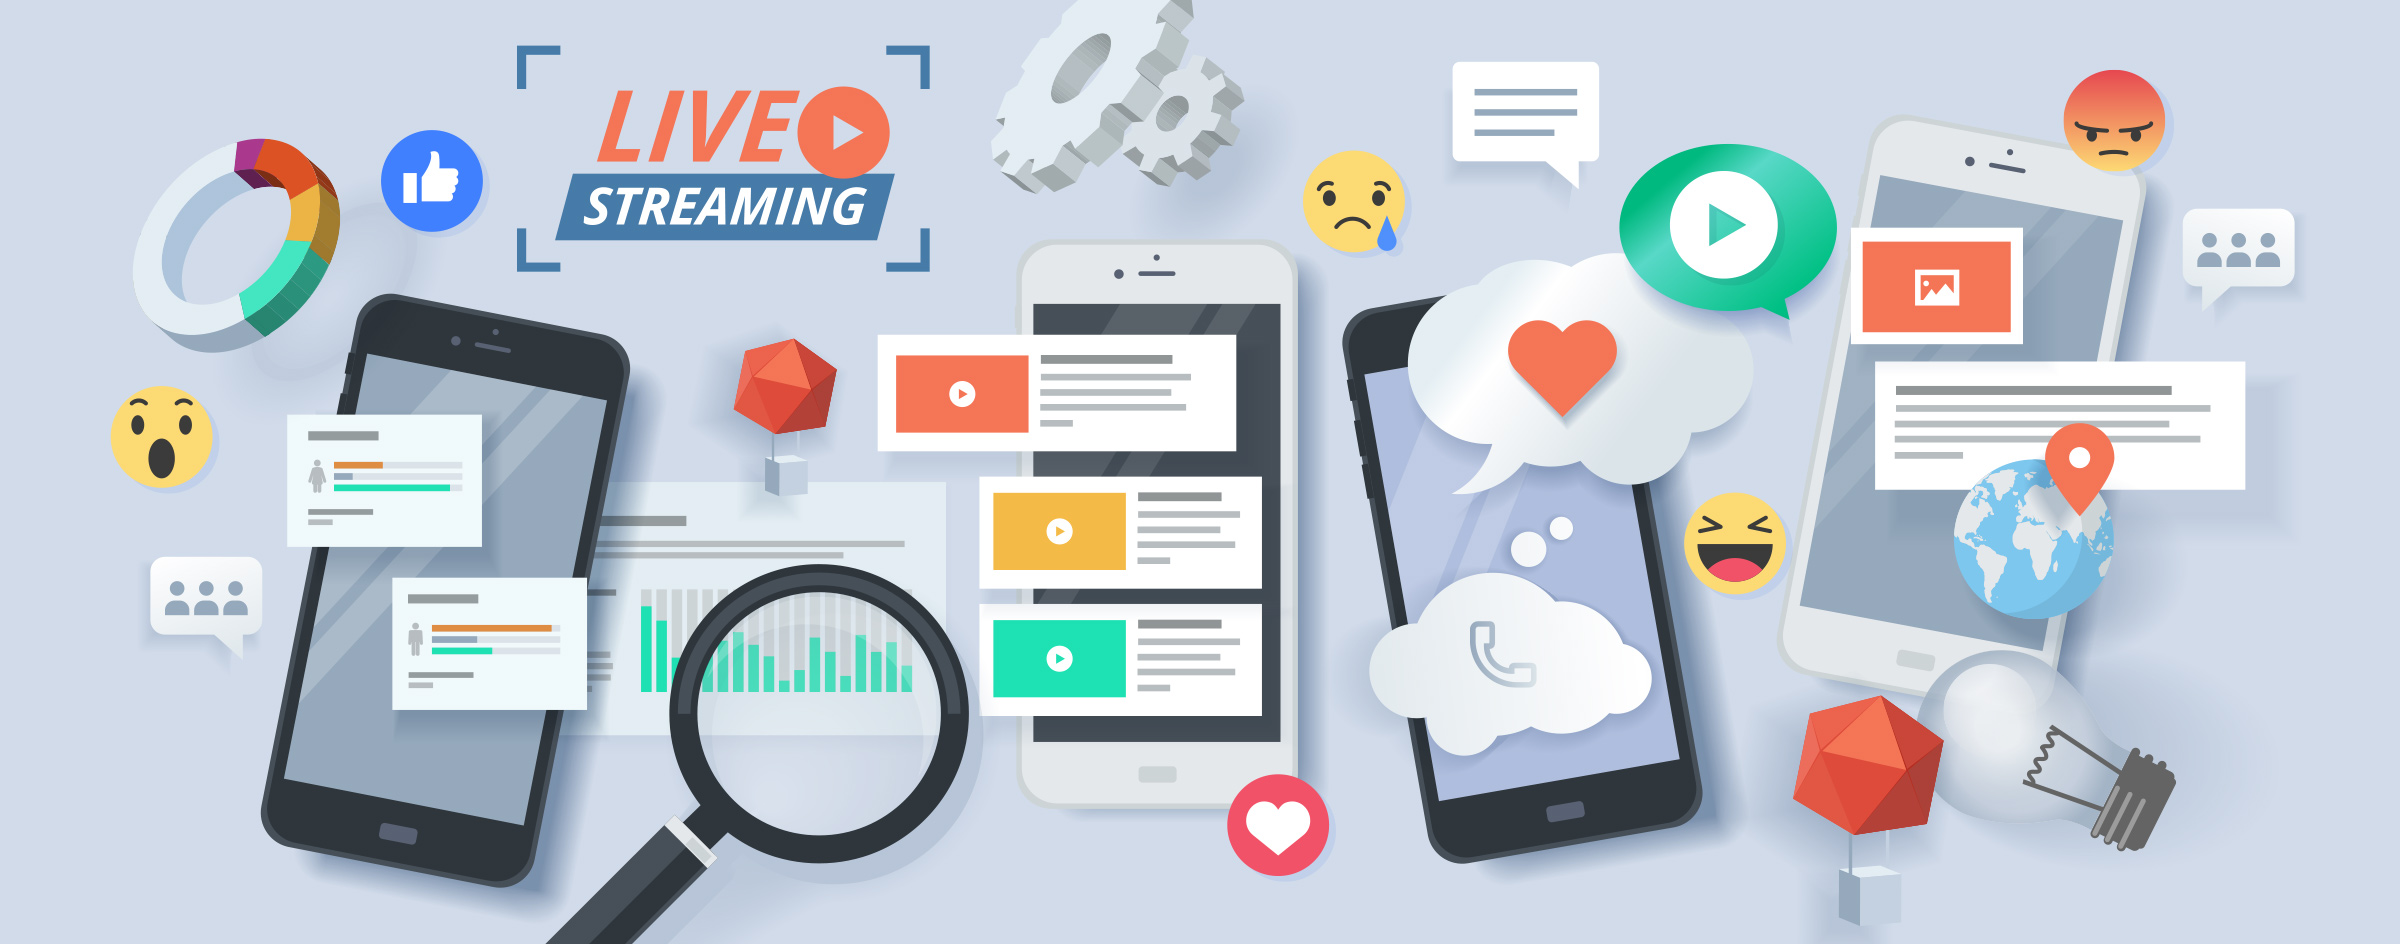 Tips to maximize engagement while live streaming